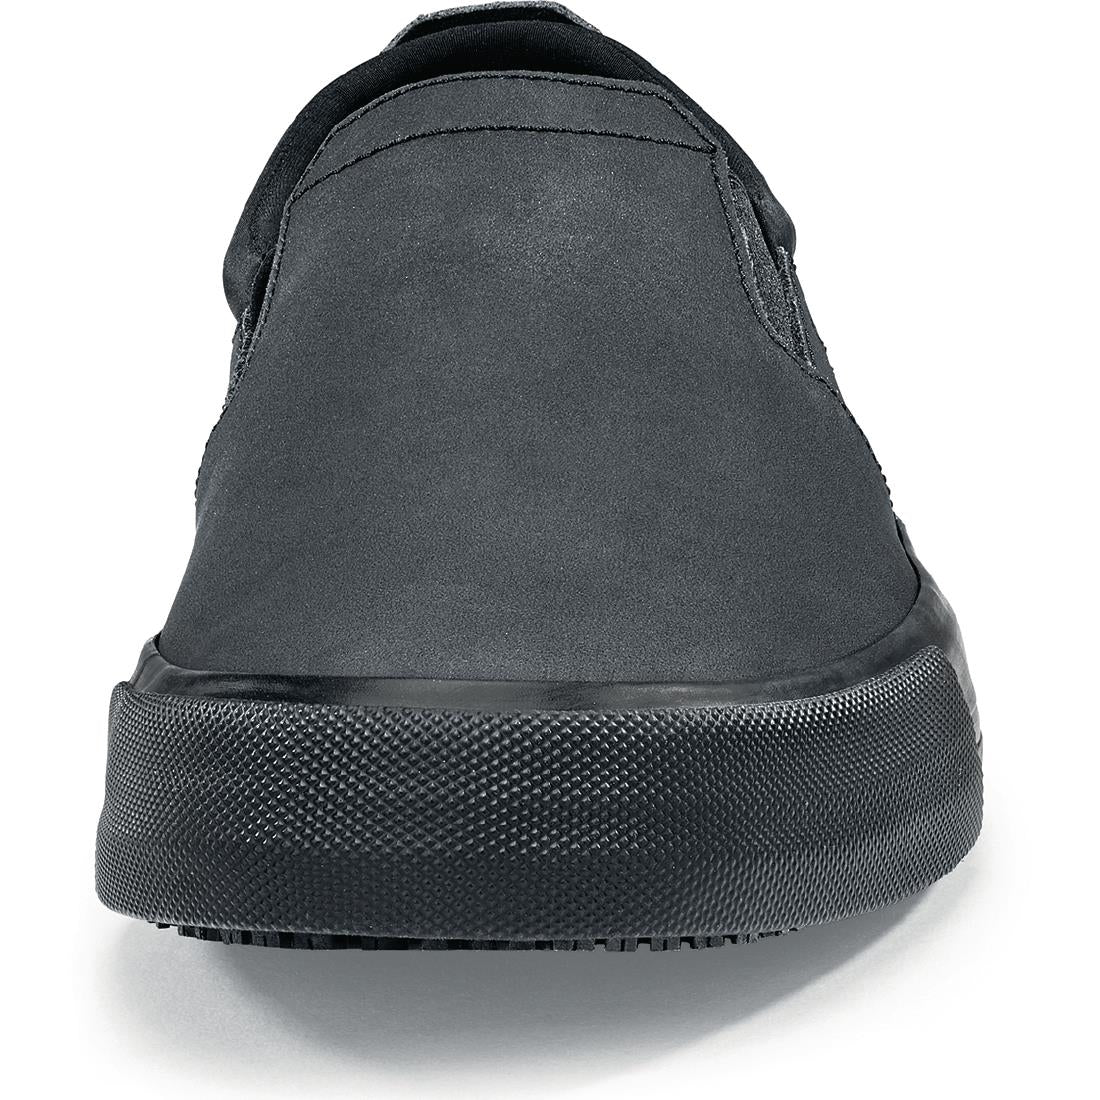 Shoes for Crews Leather Slip On BB163